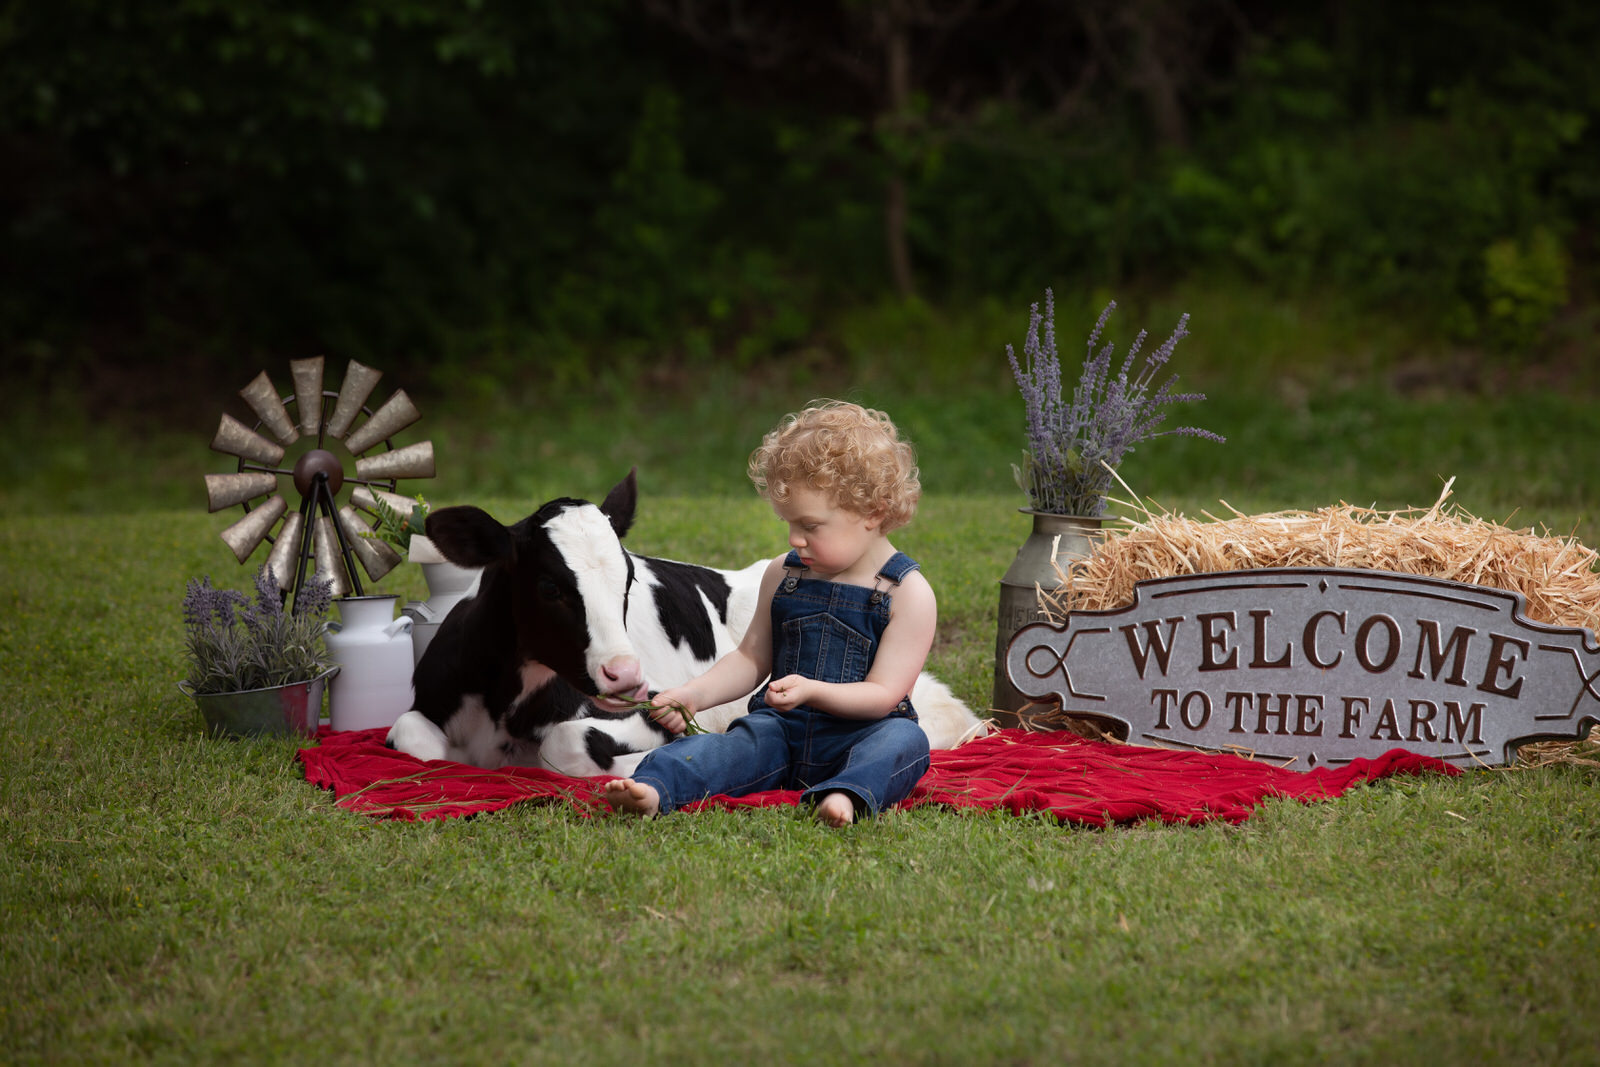 A young boy in blue overalls feeds a baby cow on a red blanket things to do in dfw with kids